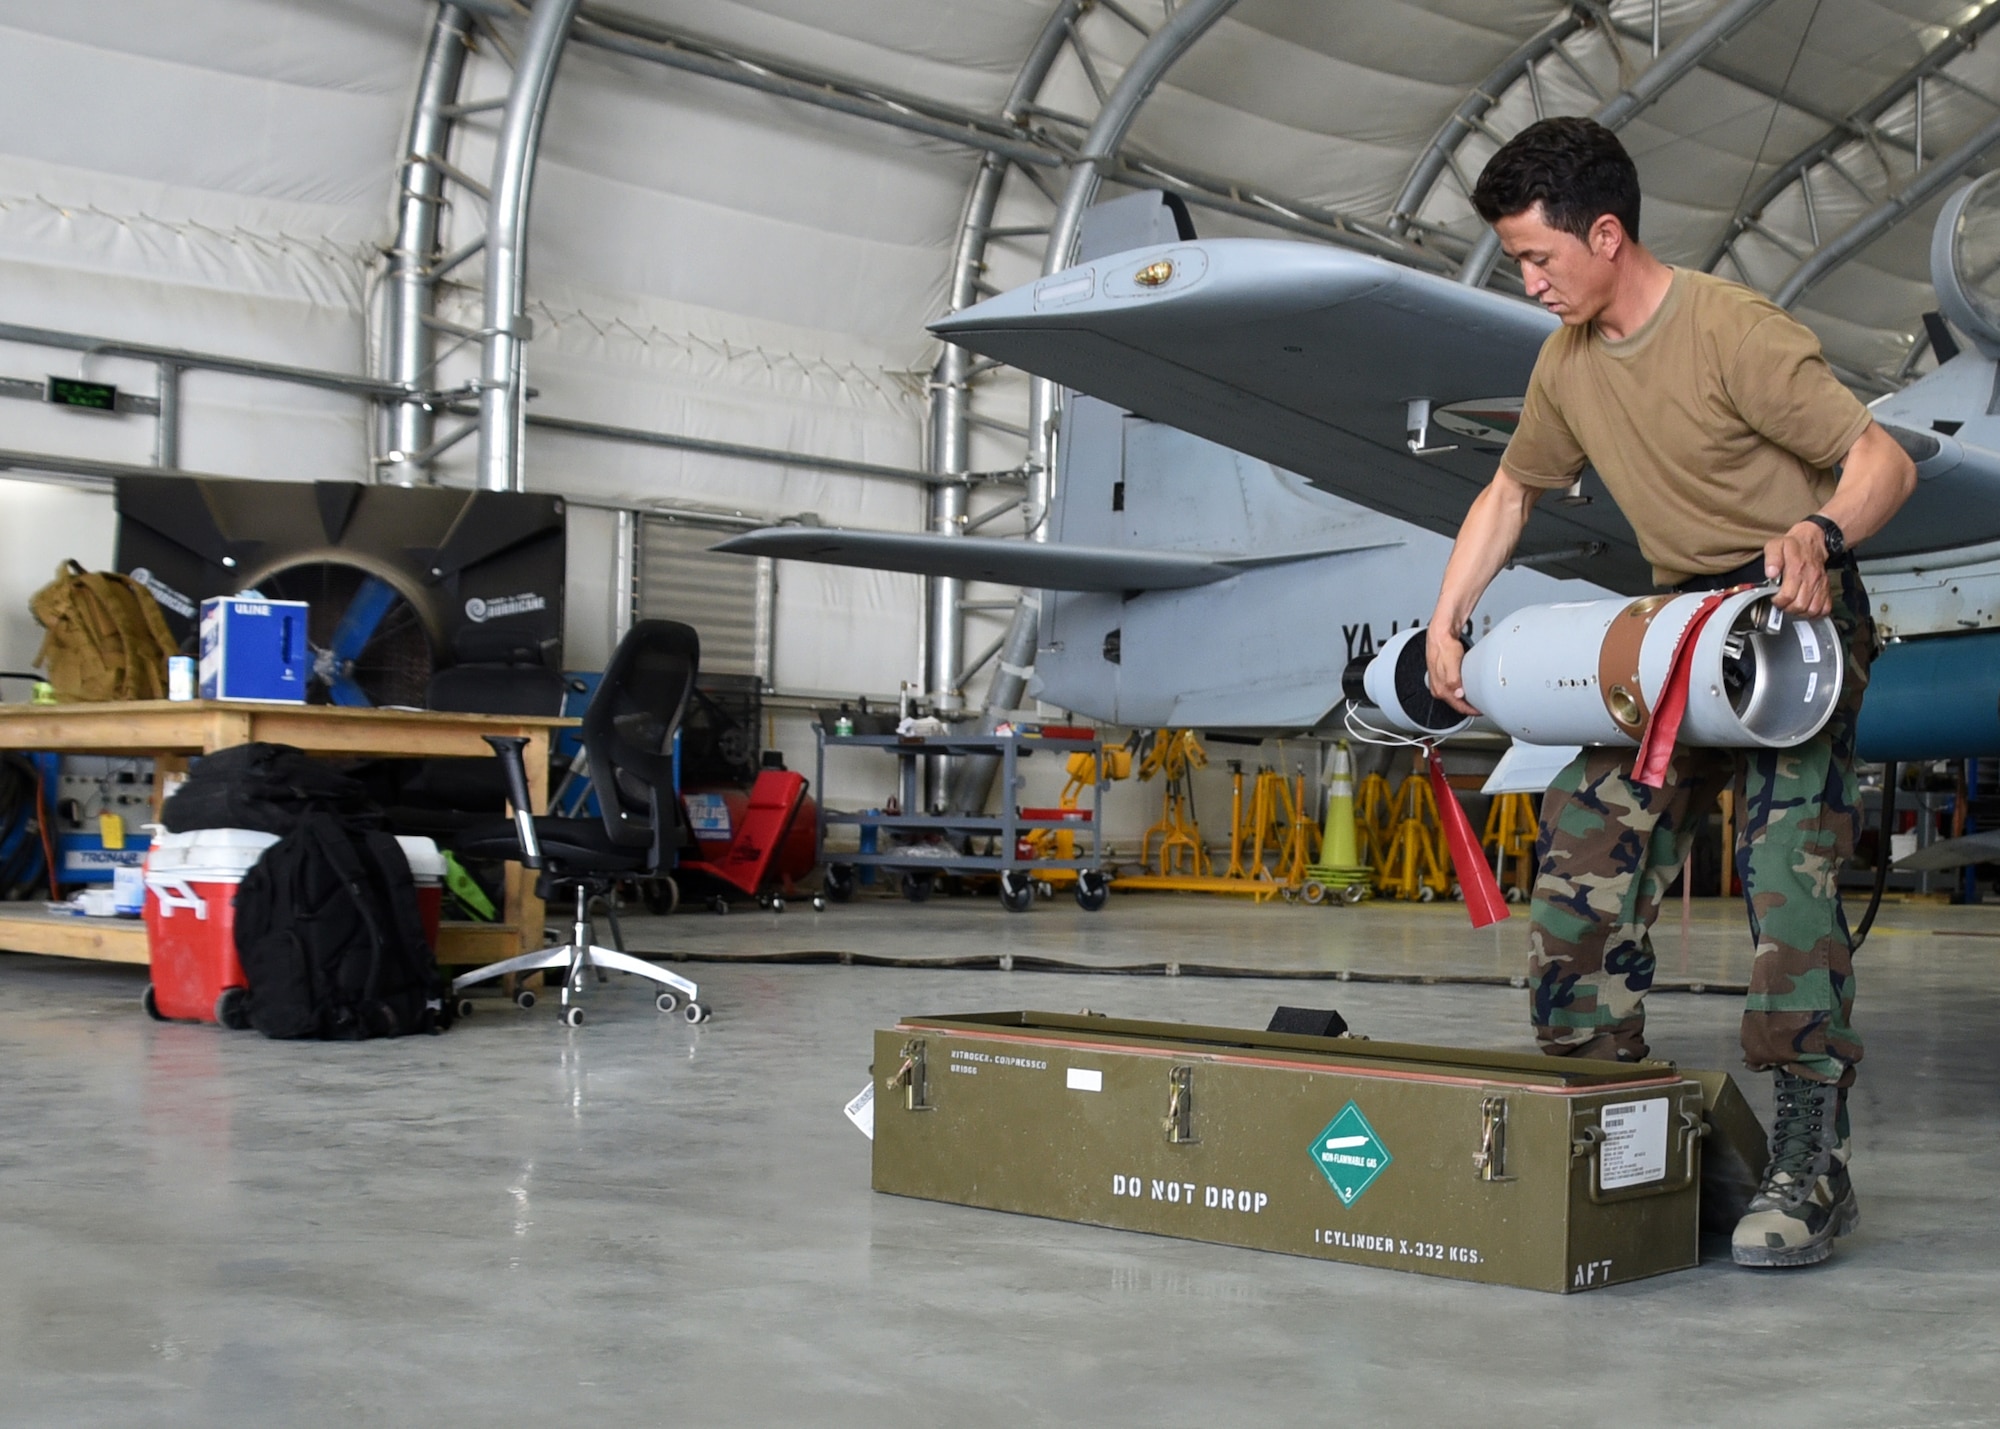 An Afghan Air Force A-29 Super Tucano maintainer downloads a GBU-12s (Guided Bomb Unit) at Kabul Air Wing, Afghanistan, July 26, 2017. Recently, AAF A-29 maintenance leadership requested to take full responsibility for flight line maintenance operations from Train, Advise, Assist Command-Air advisors and contract maintenance. This initiative by the maintainers is another step closer to the AAF becoming a professional, capable and sustainable force. (U.S. Air Force photo by Tech. Sgt. Veronica Pierce)